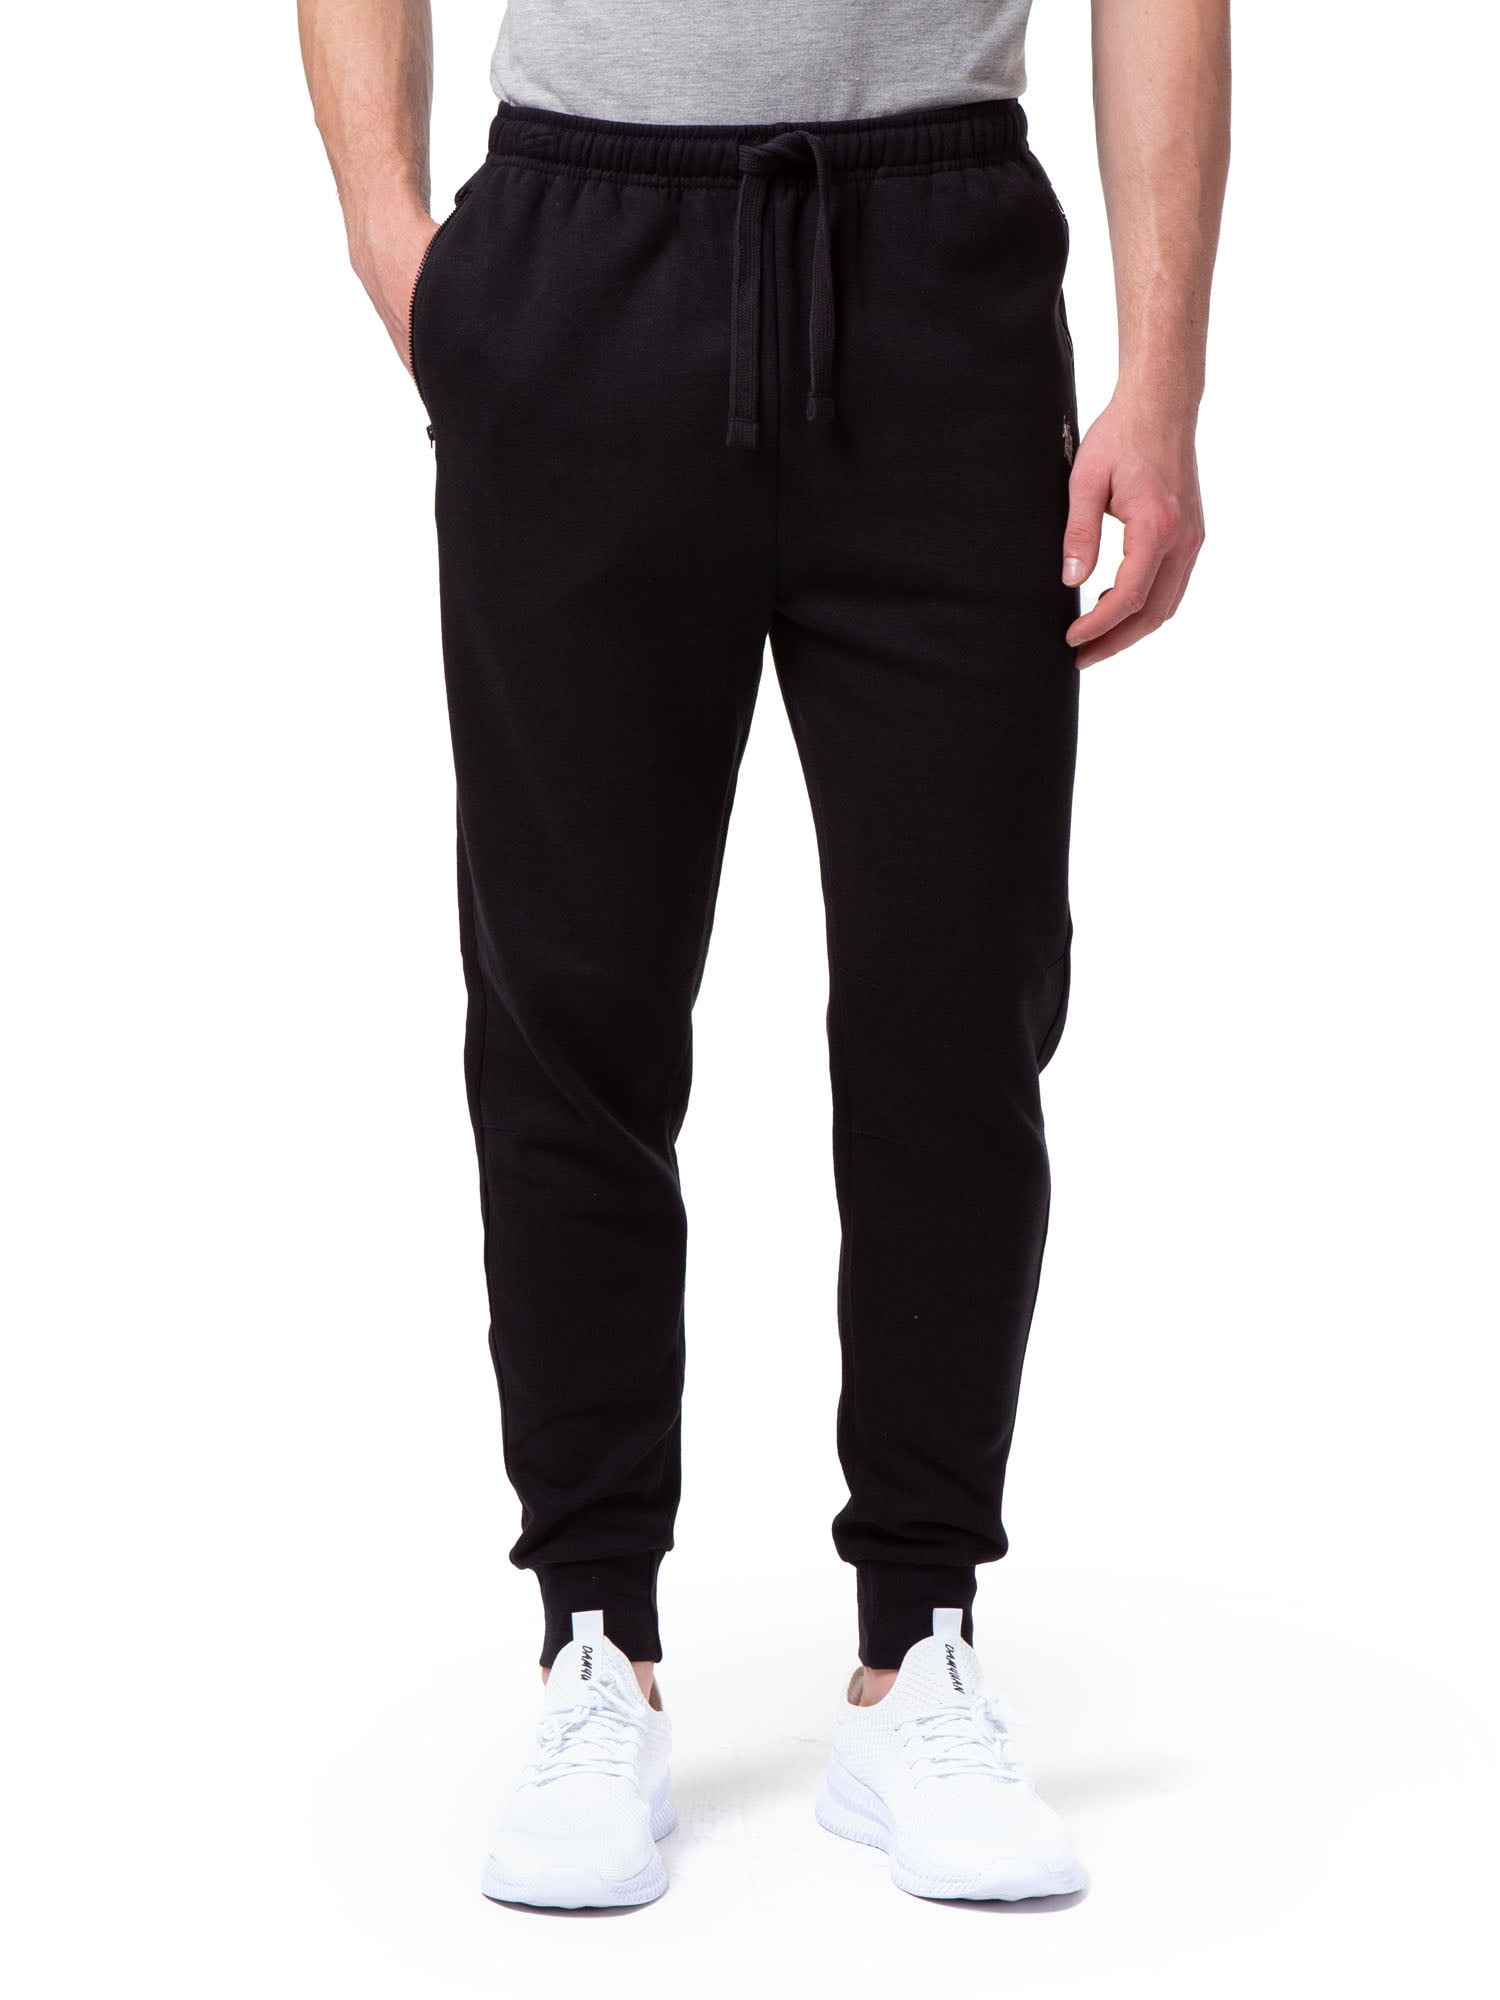 U.S. POLO ASSN. Men Regular Fit Solid Cotton I690 Lounge Pants - Pack of 1  (Black S) : Amazon.in: Fashion